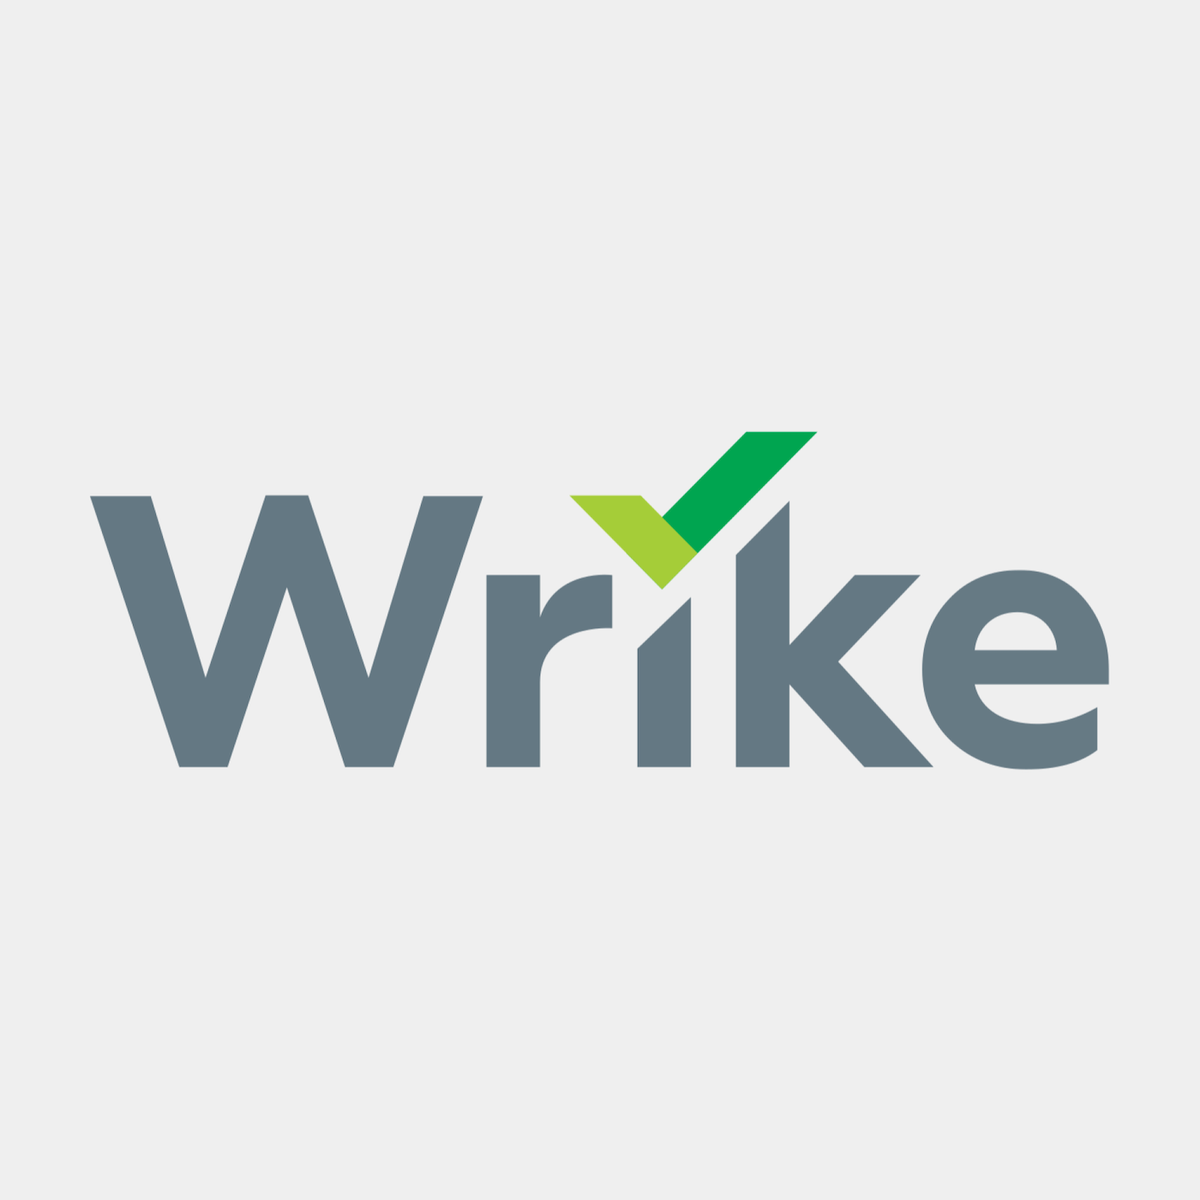 Create and manage a project dashboard with Wrike